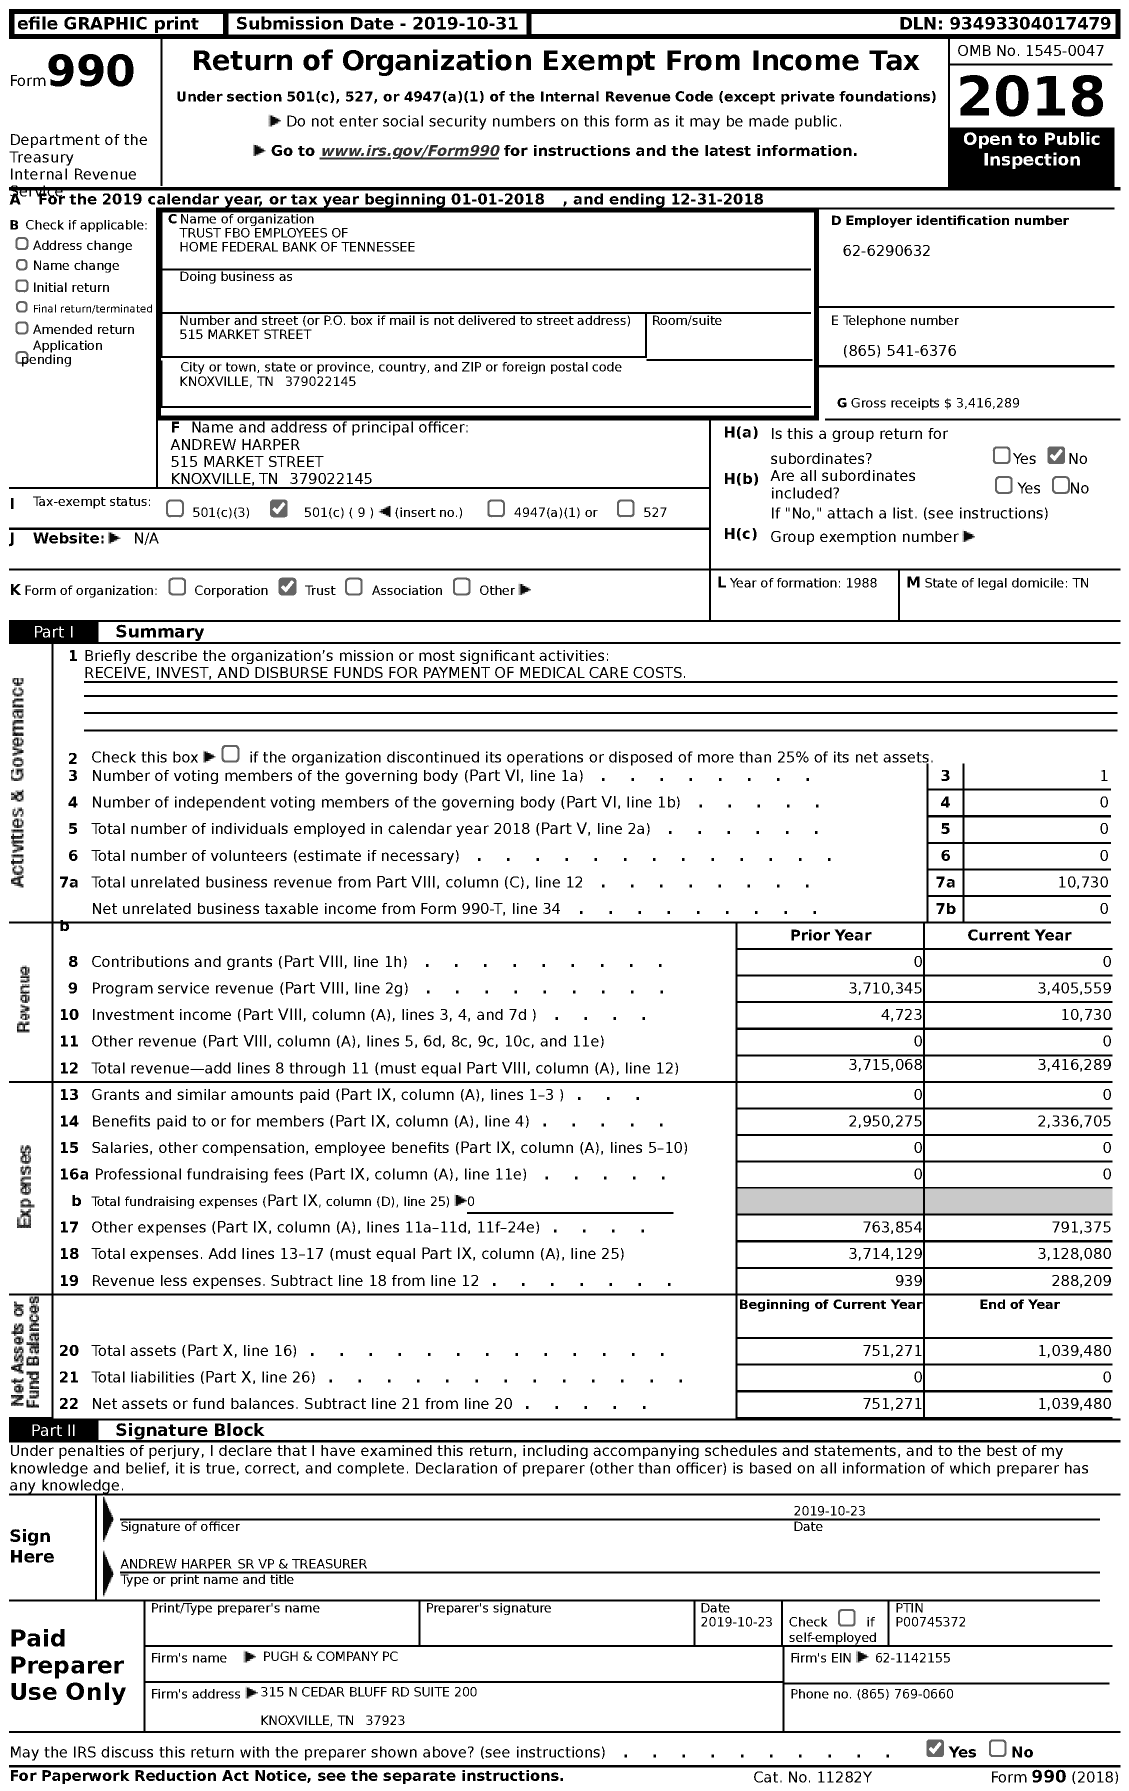 Image of first page of 2018 Form 990 for Trust Fbo Employees of Home Federal Bank of Tennessee